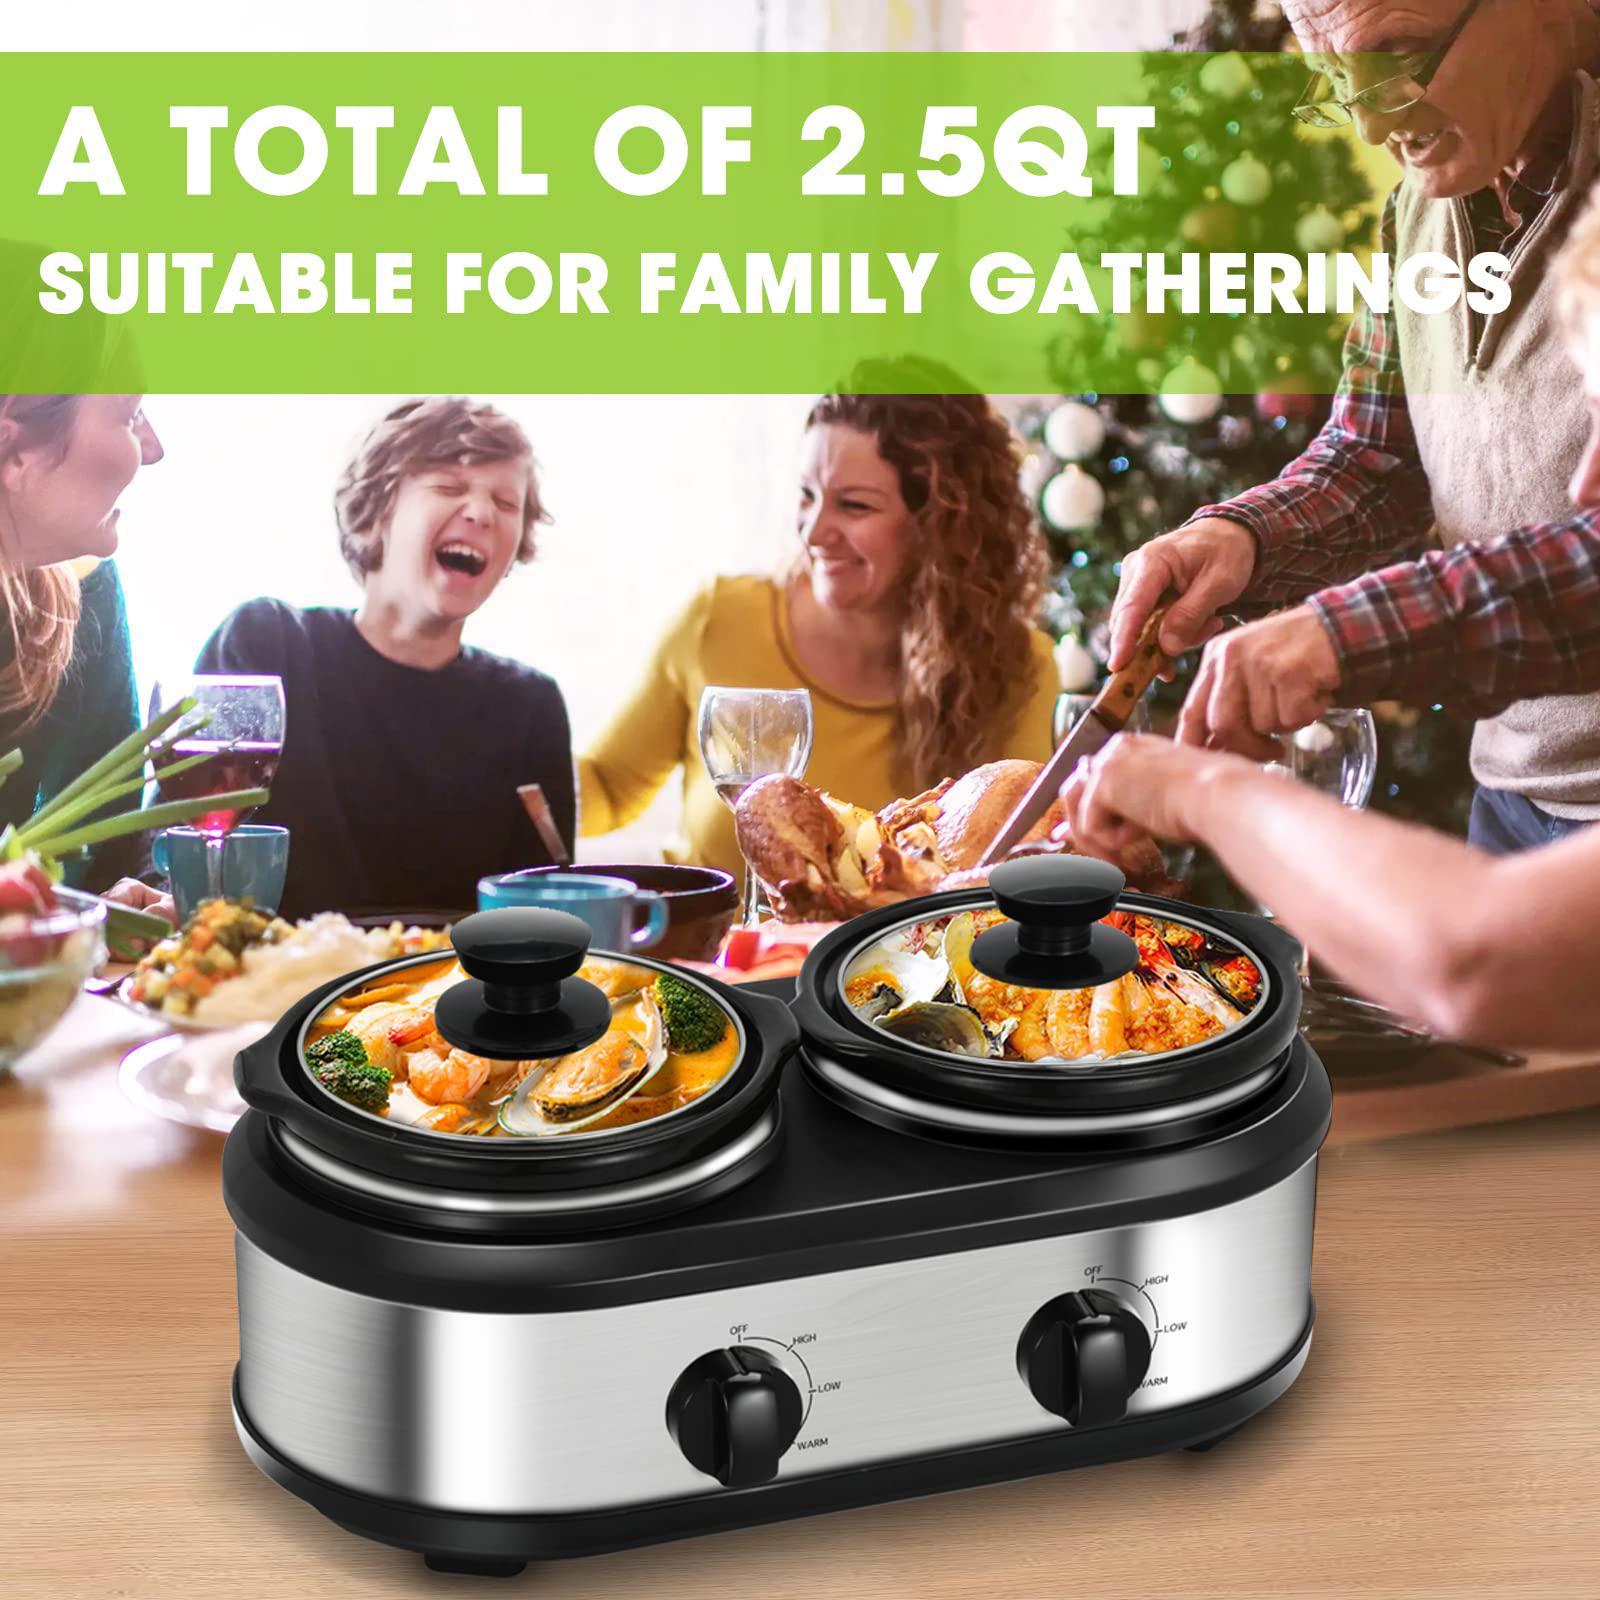 Kiss The Water Triple Slow Cooker, Buffet Server Food Warmer, 3 * 1.5qt Slow Cooker with Ceramic Pot, 3 Modes Adjustable Temp, Dishwasher SA